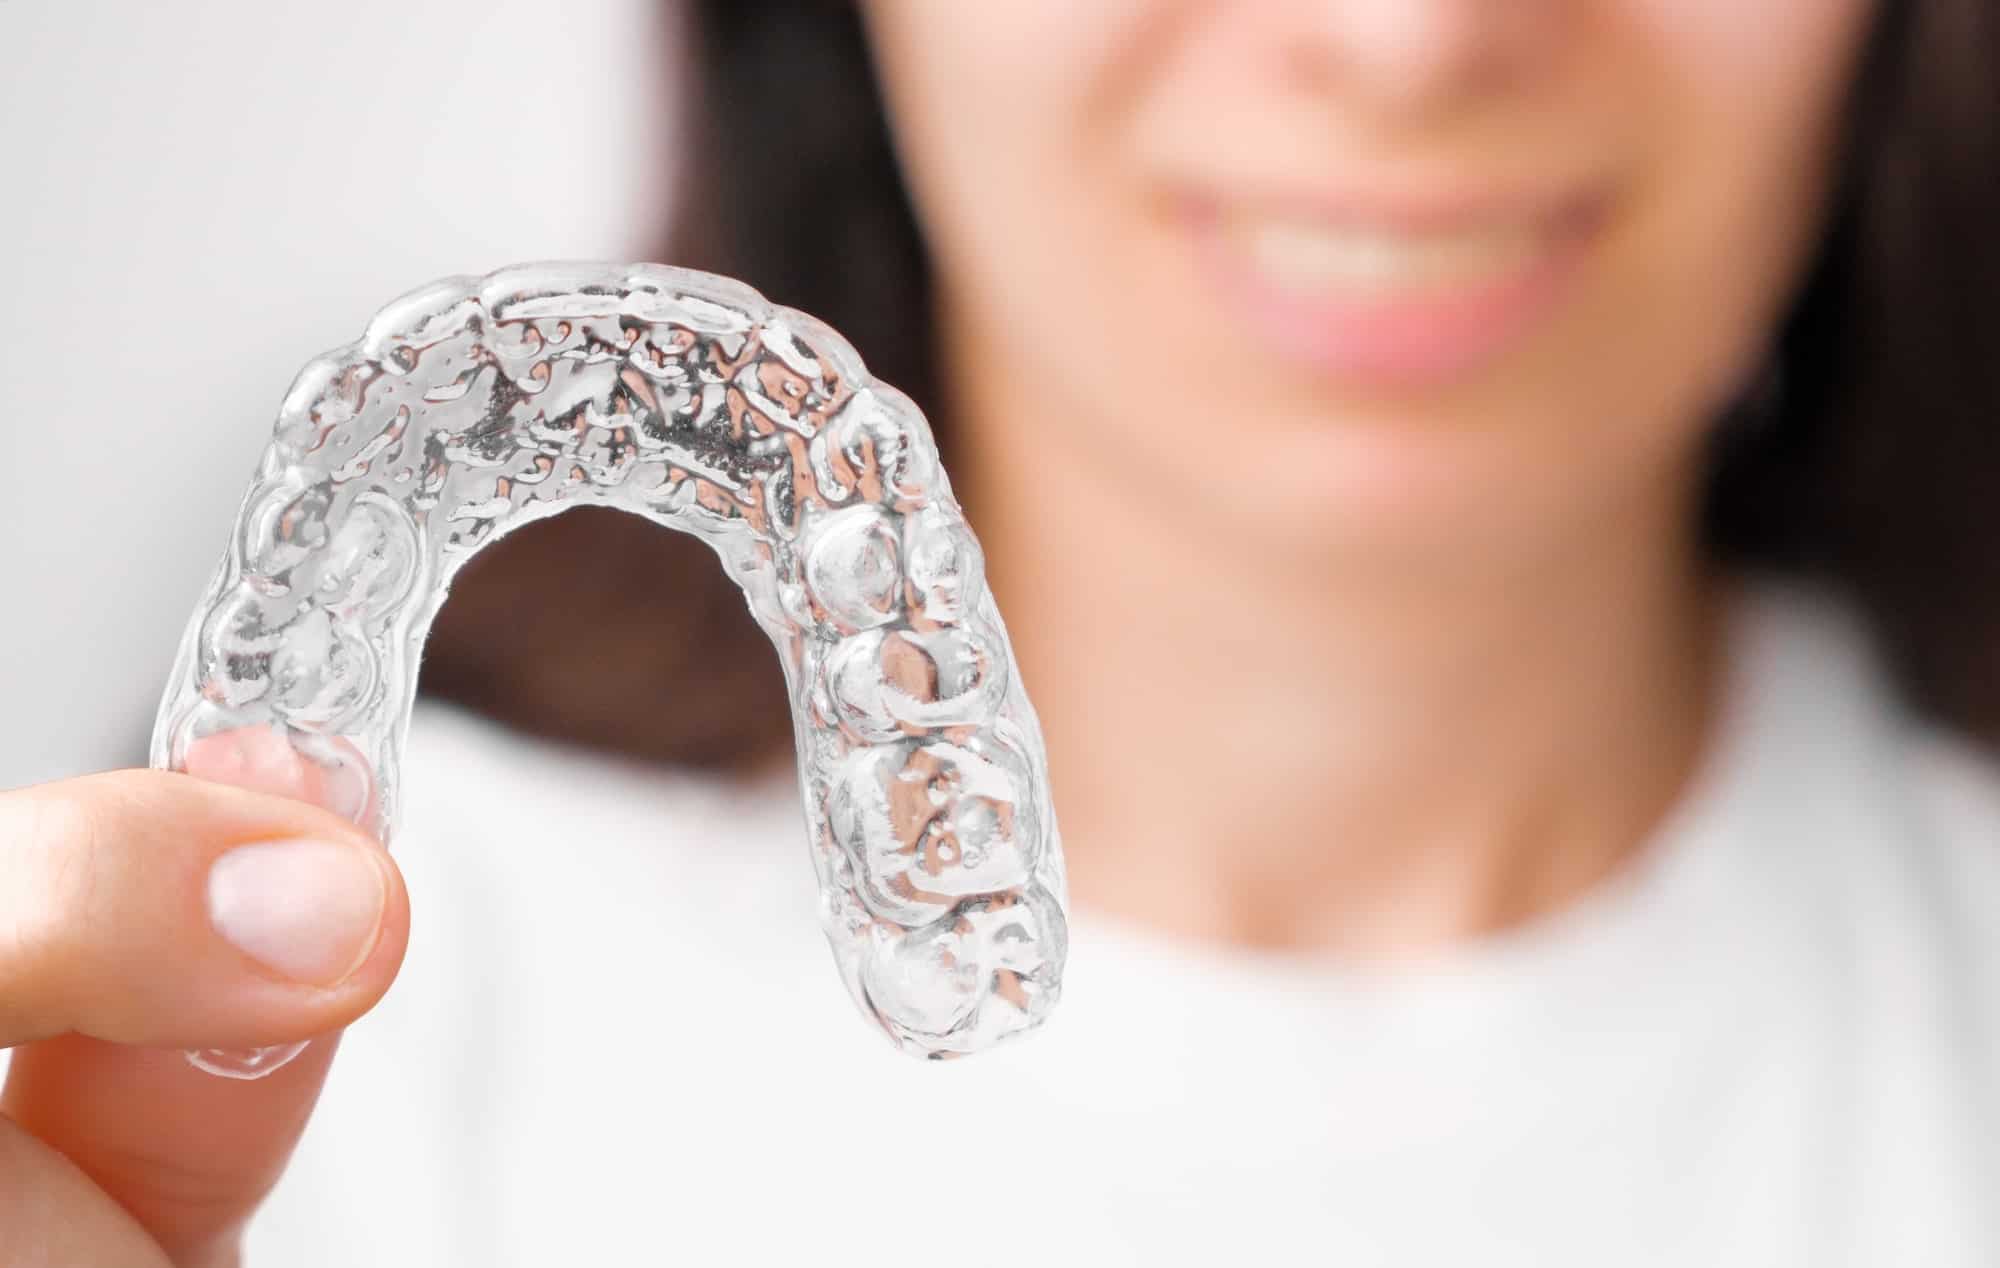 Close up orthodontic transparent aligner in womans hand. Removable braces